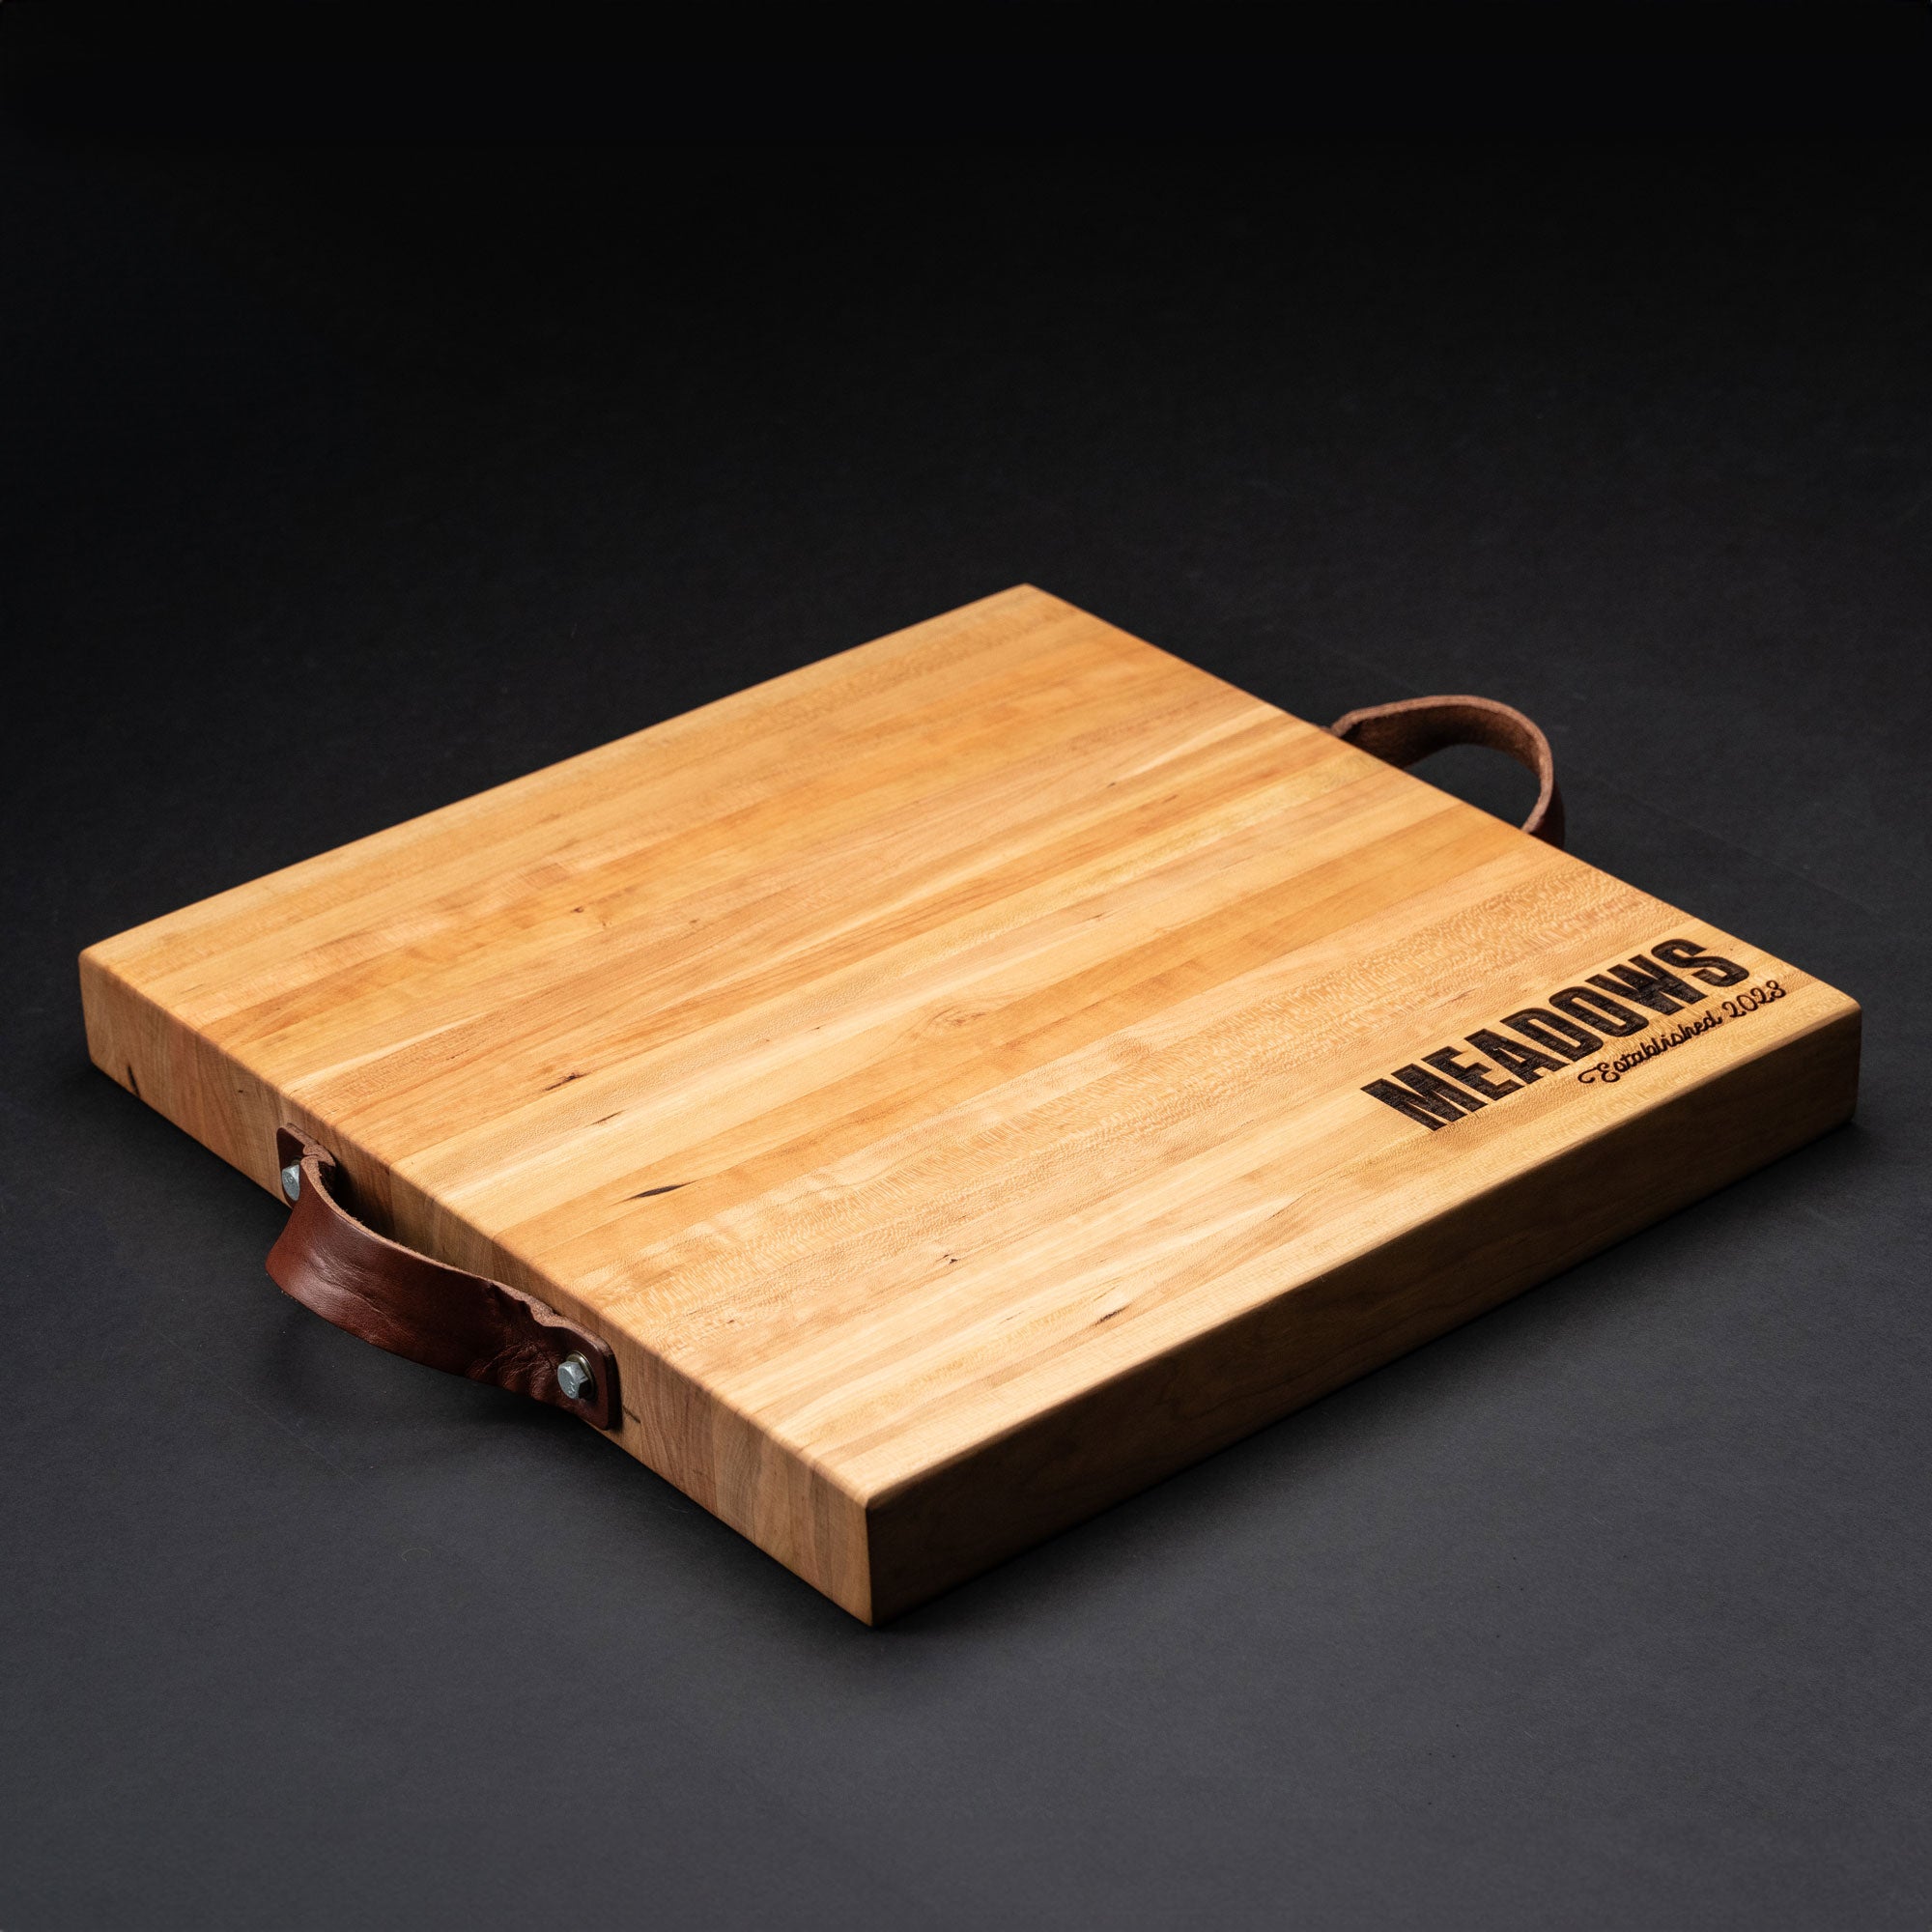 American Cherry Wood Butcher Block Cutting Board, Small - 13.5in x 13.5in / Remove Handles (-$5.00)at Holtz Leather